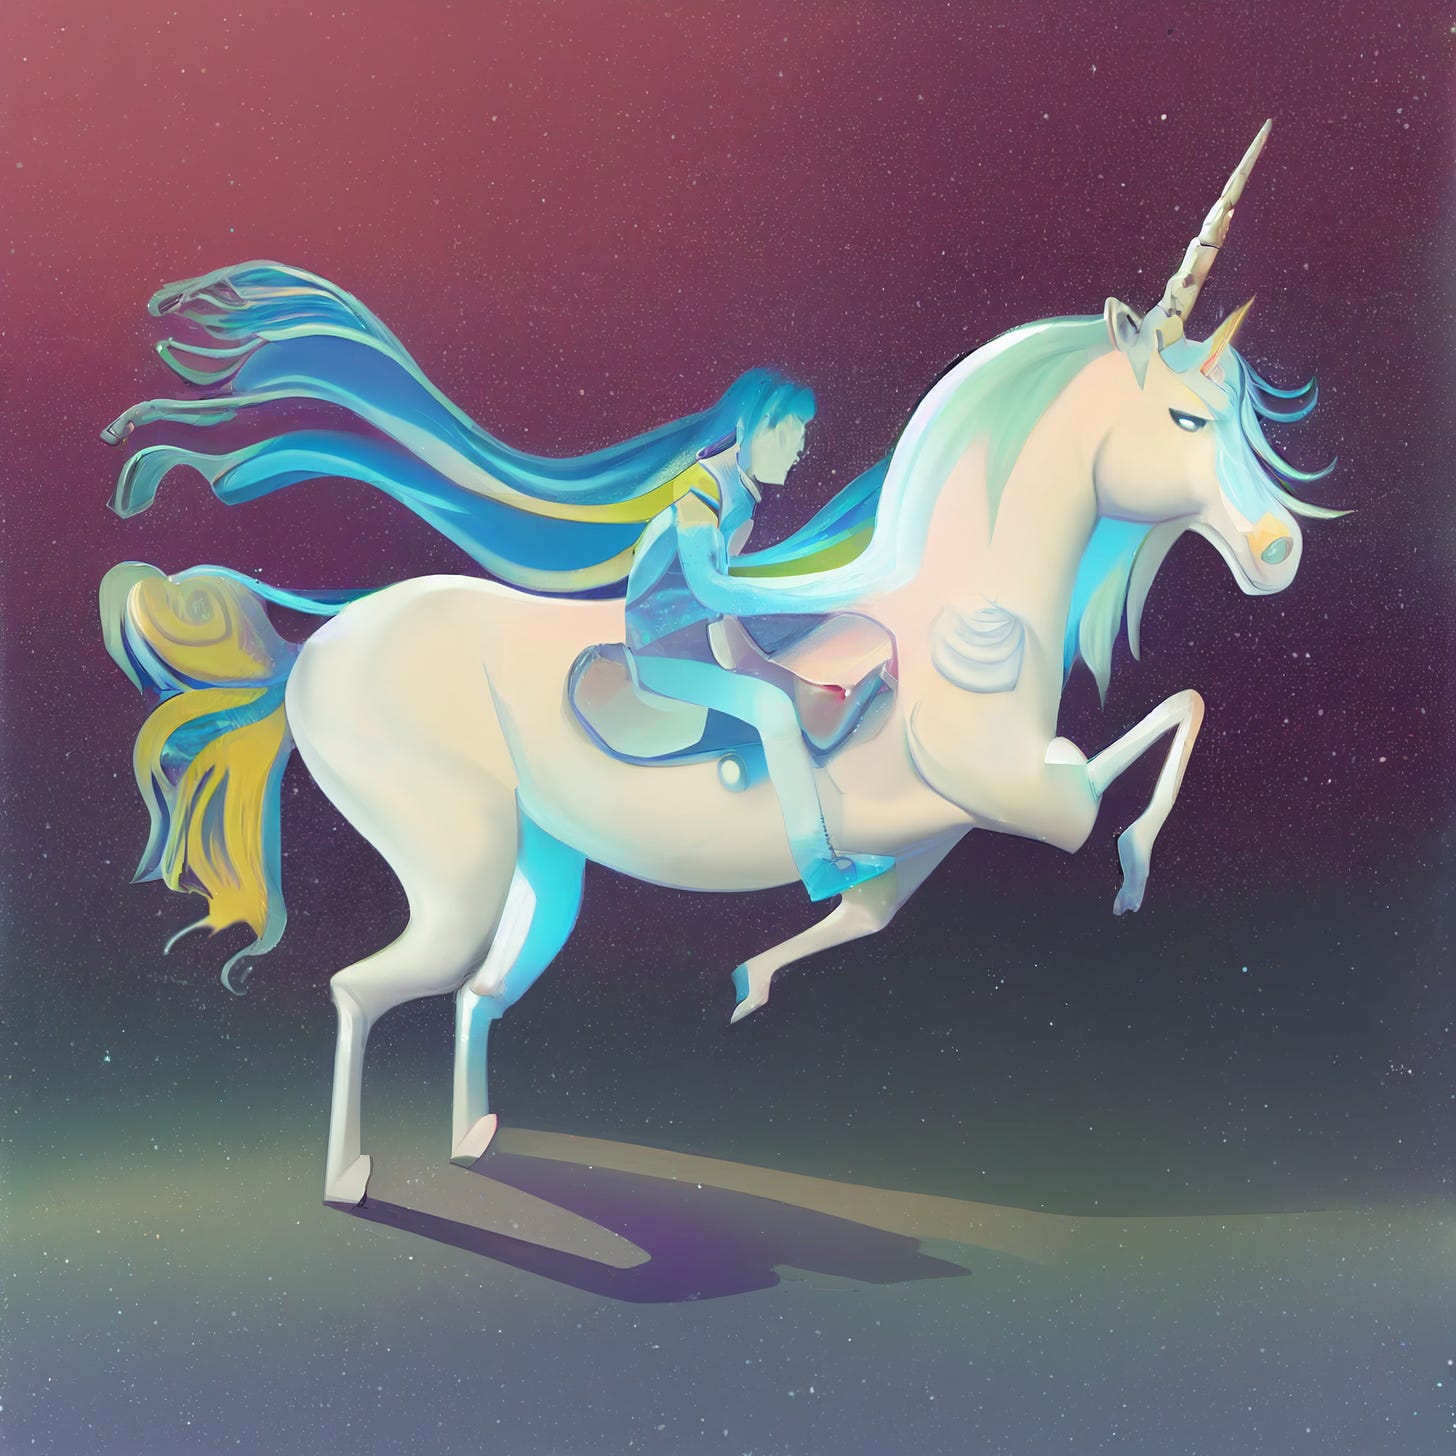 humanoid attached to unicorn with flowing hair matching unicorn's tail